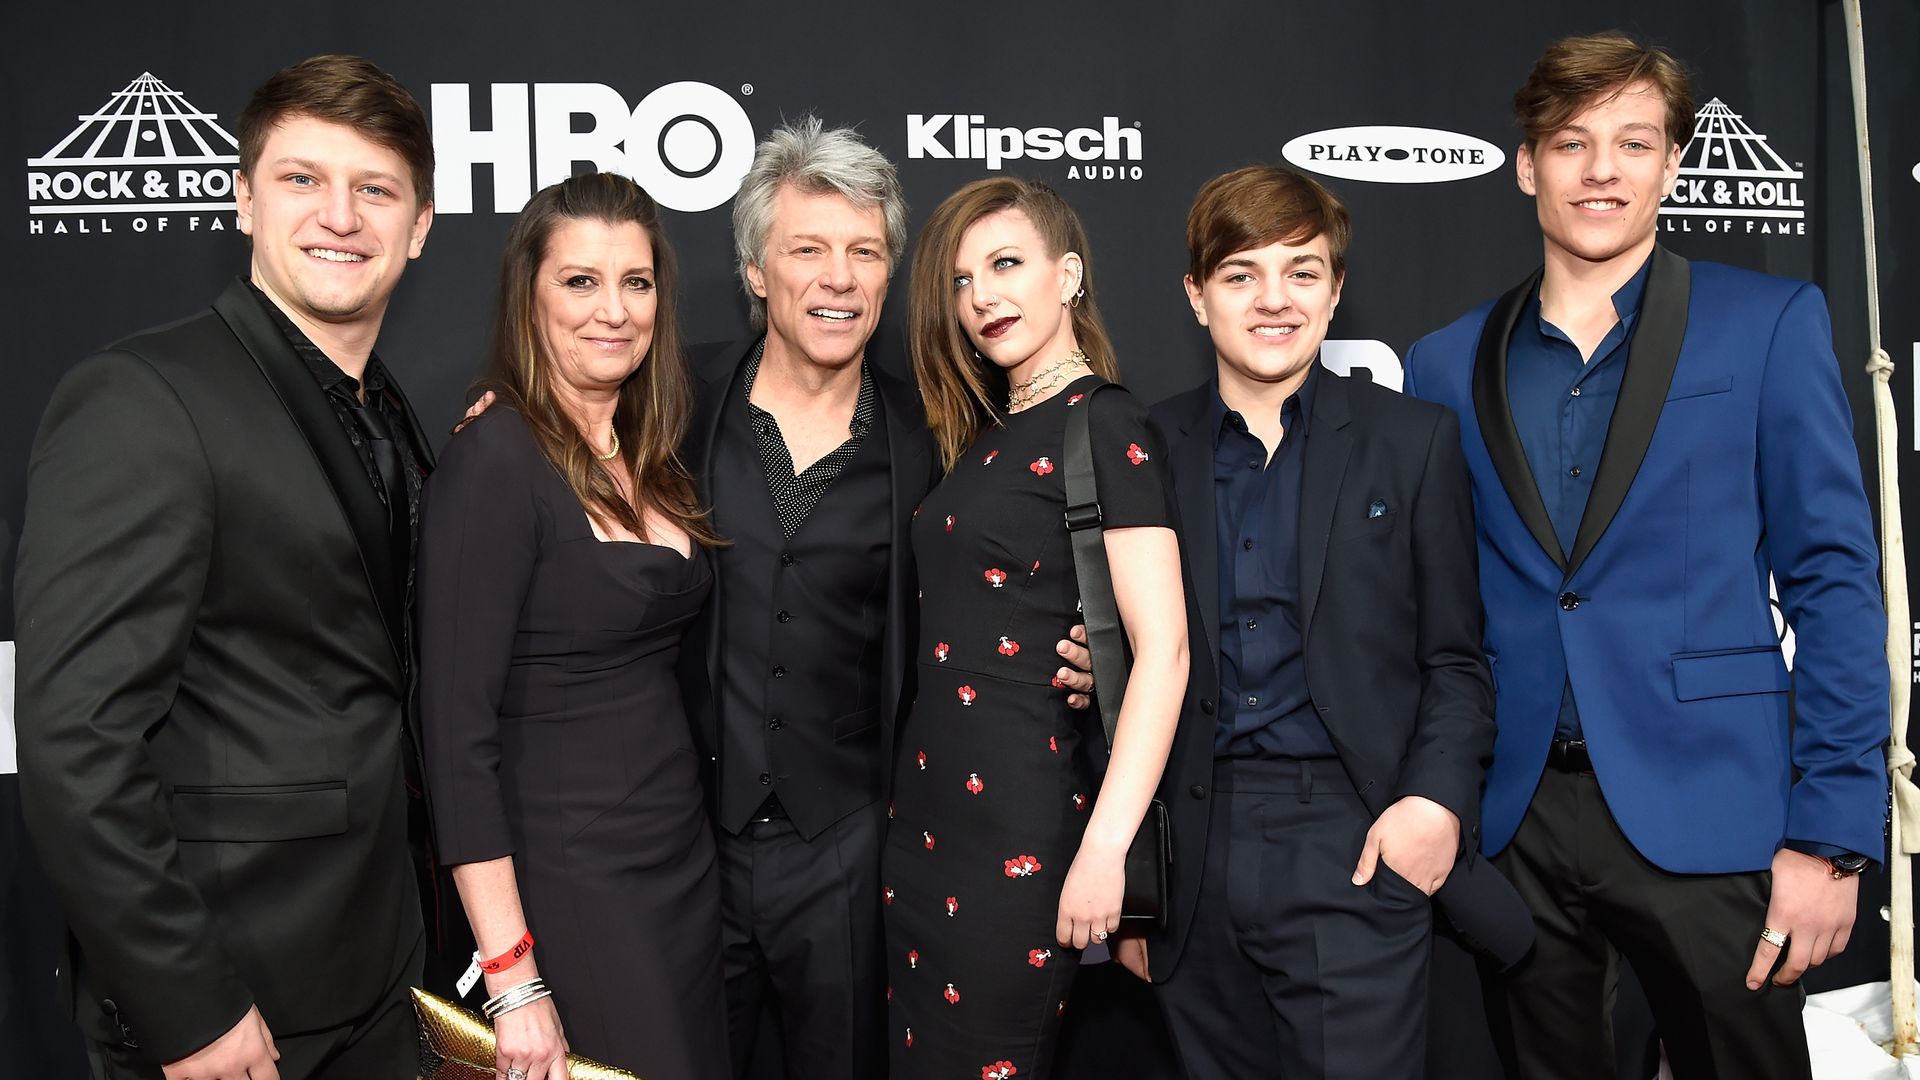 Inductee Jon Bon Jovi and family attend the 33rd Annual Rock & Roll Hall of Fame Induction Ceremony at Public Auditorium on April 14, 2018 in Cleveland, Ohio.